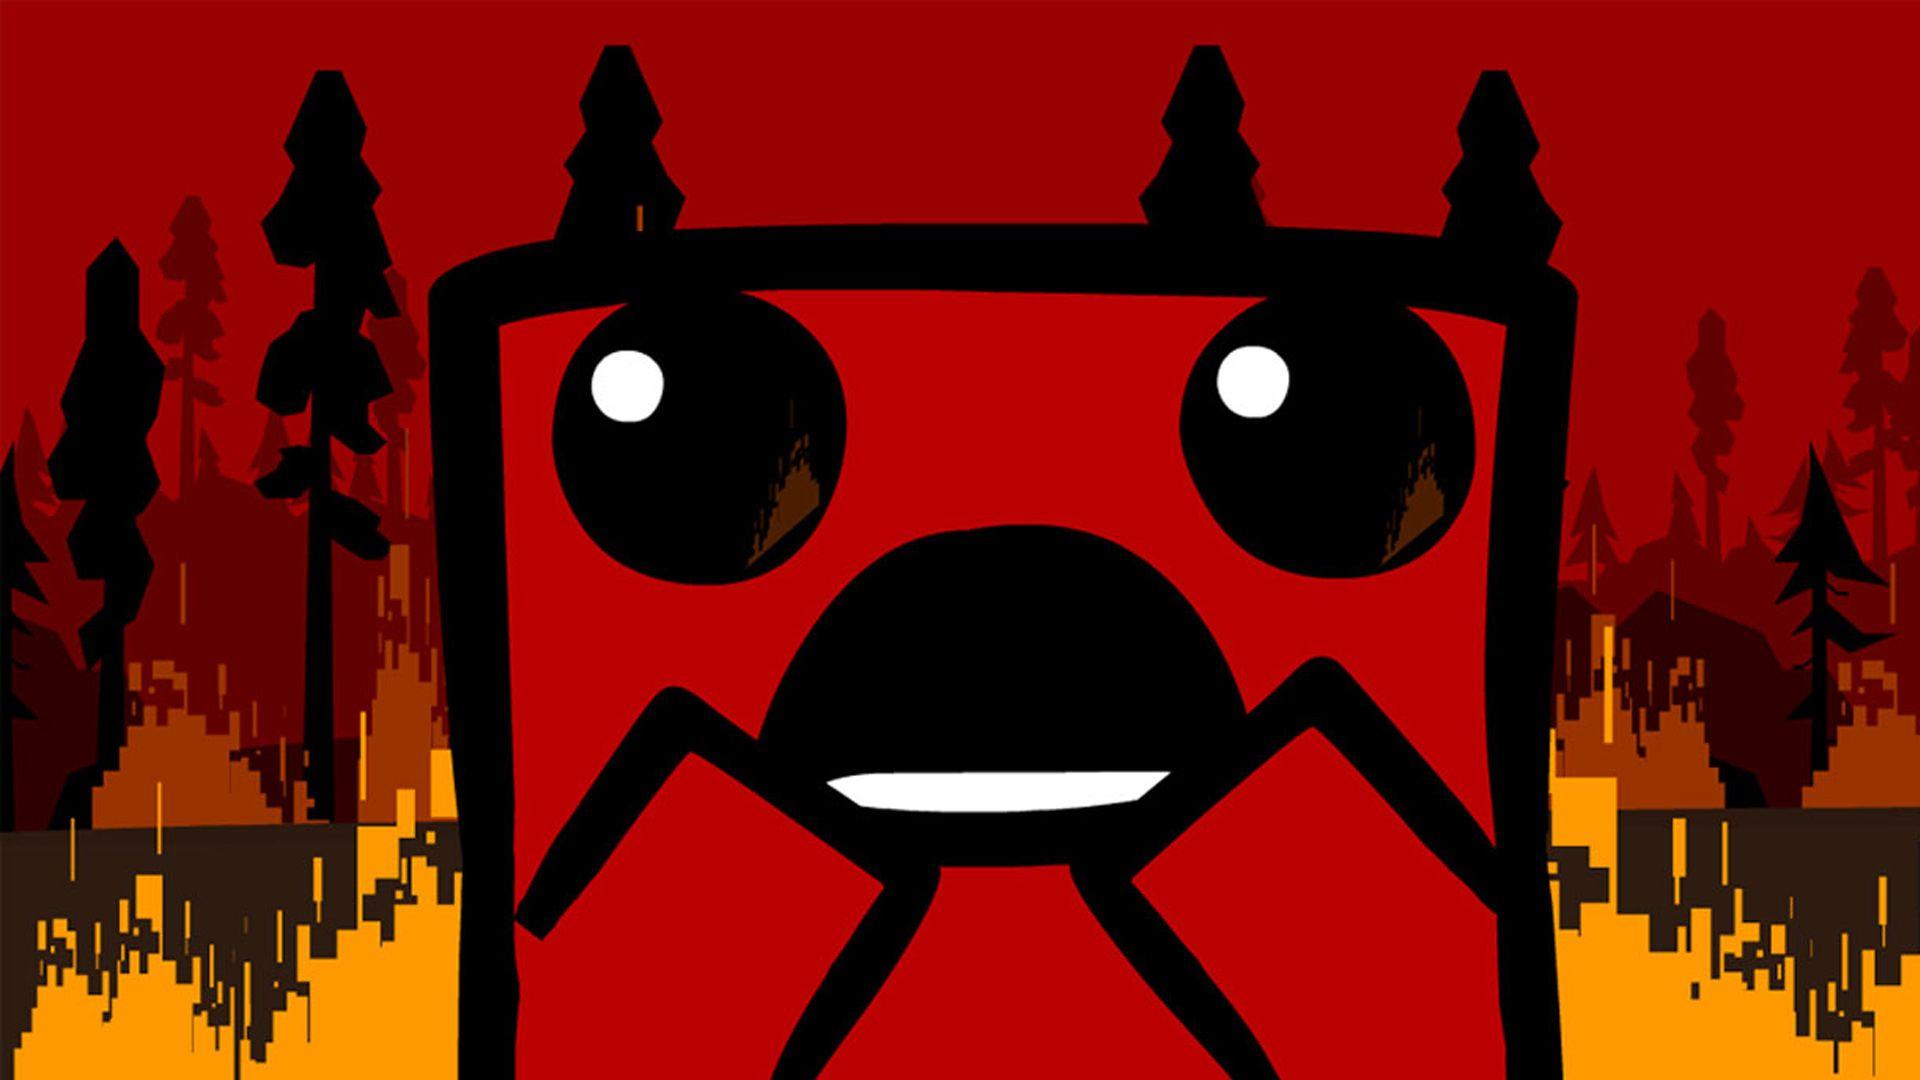 Super Meat Boy Forever Wallpapers Wallpaper Cave Images, Photos, Reviews